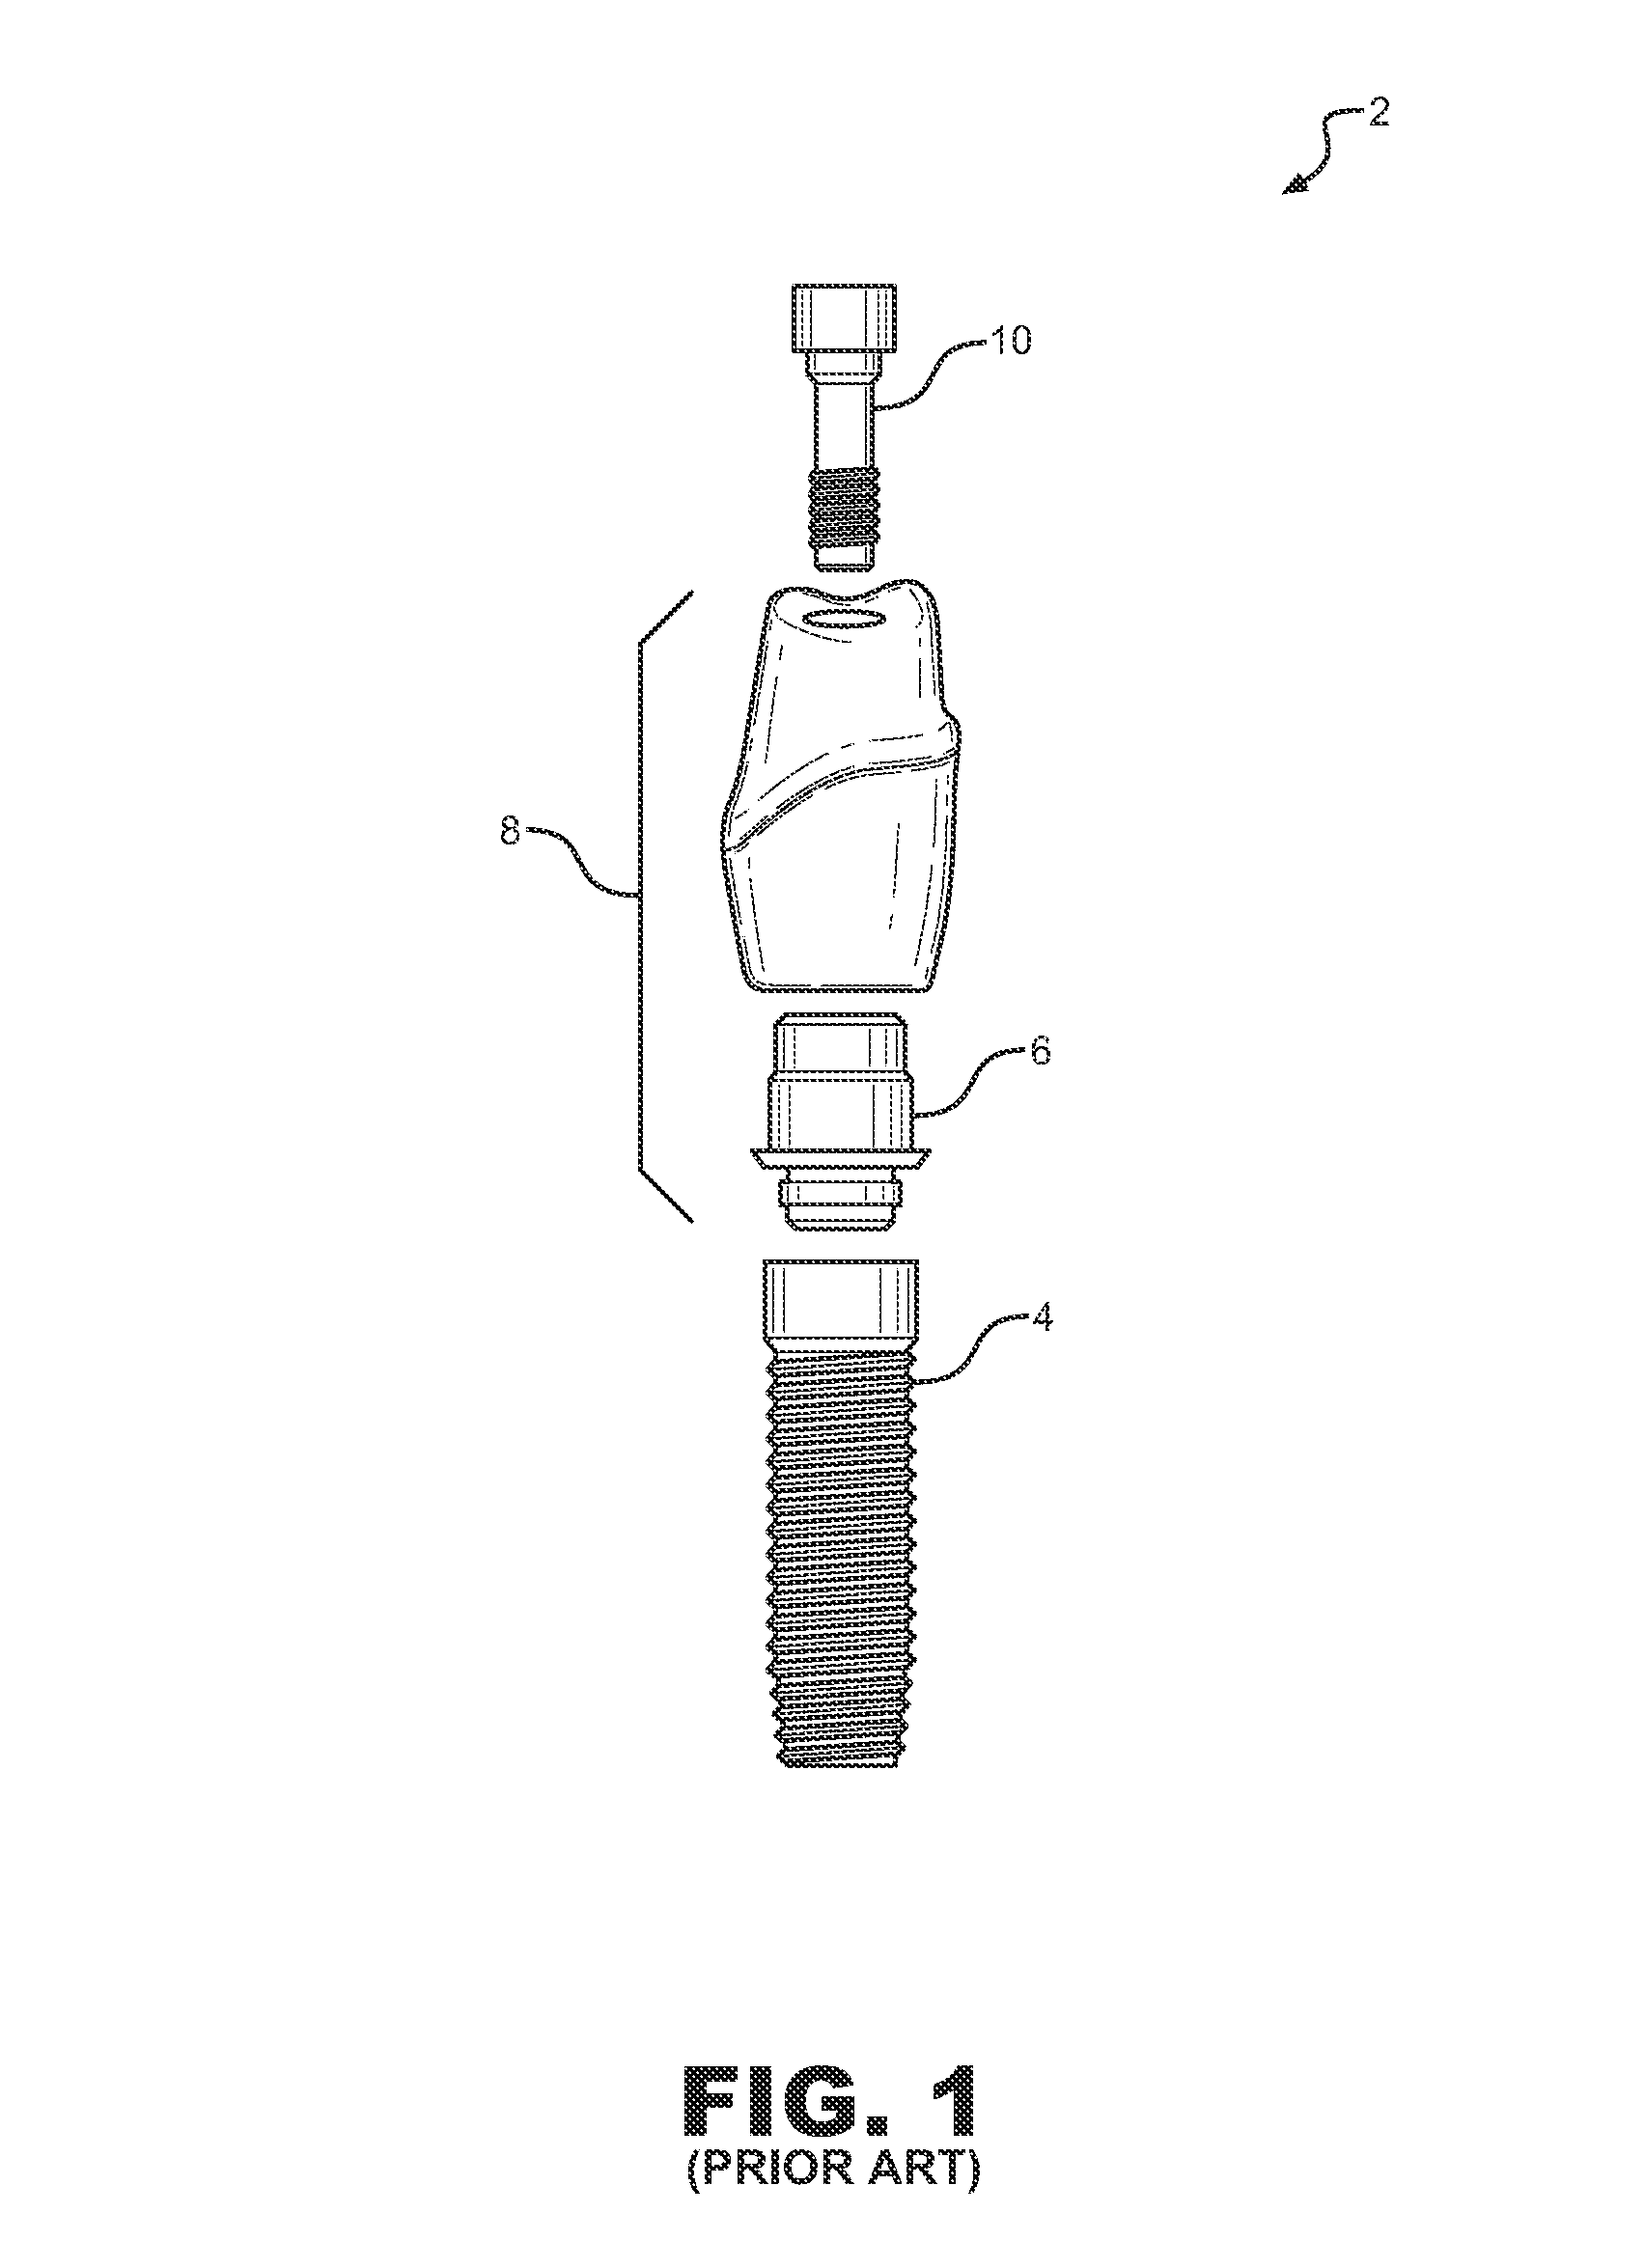 Dental implant system and method of use